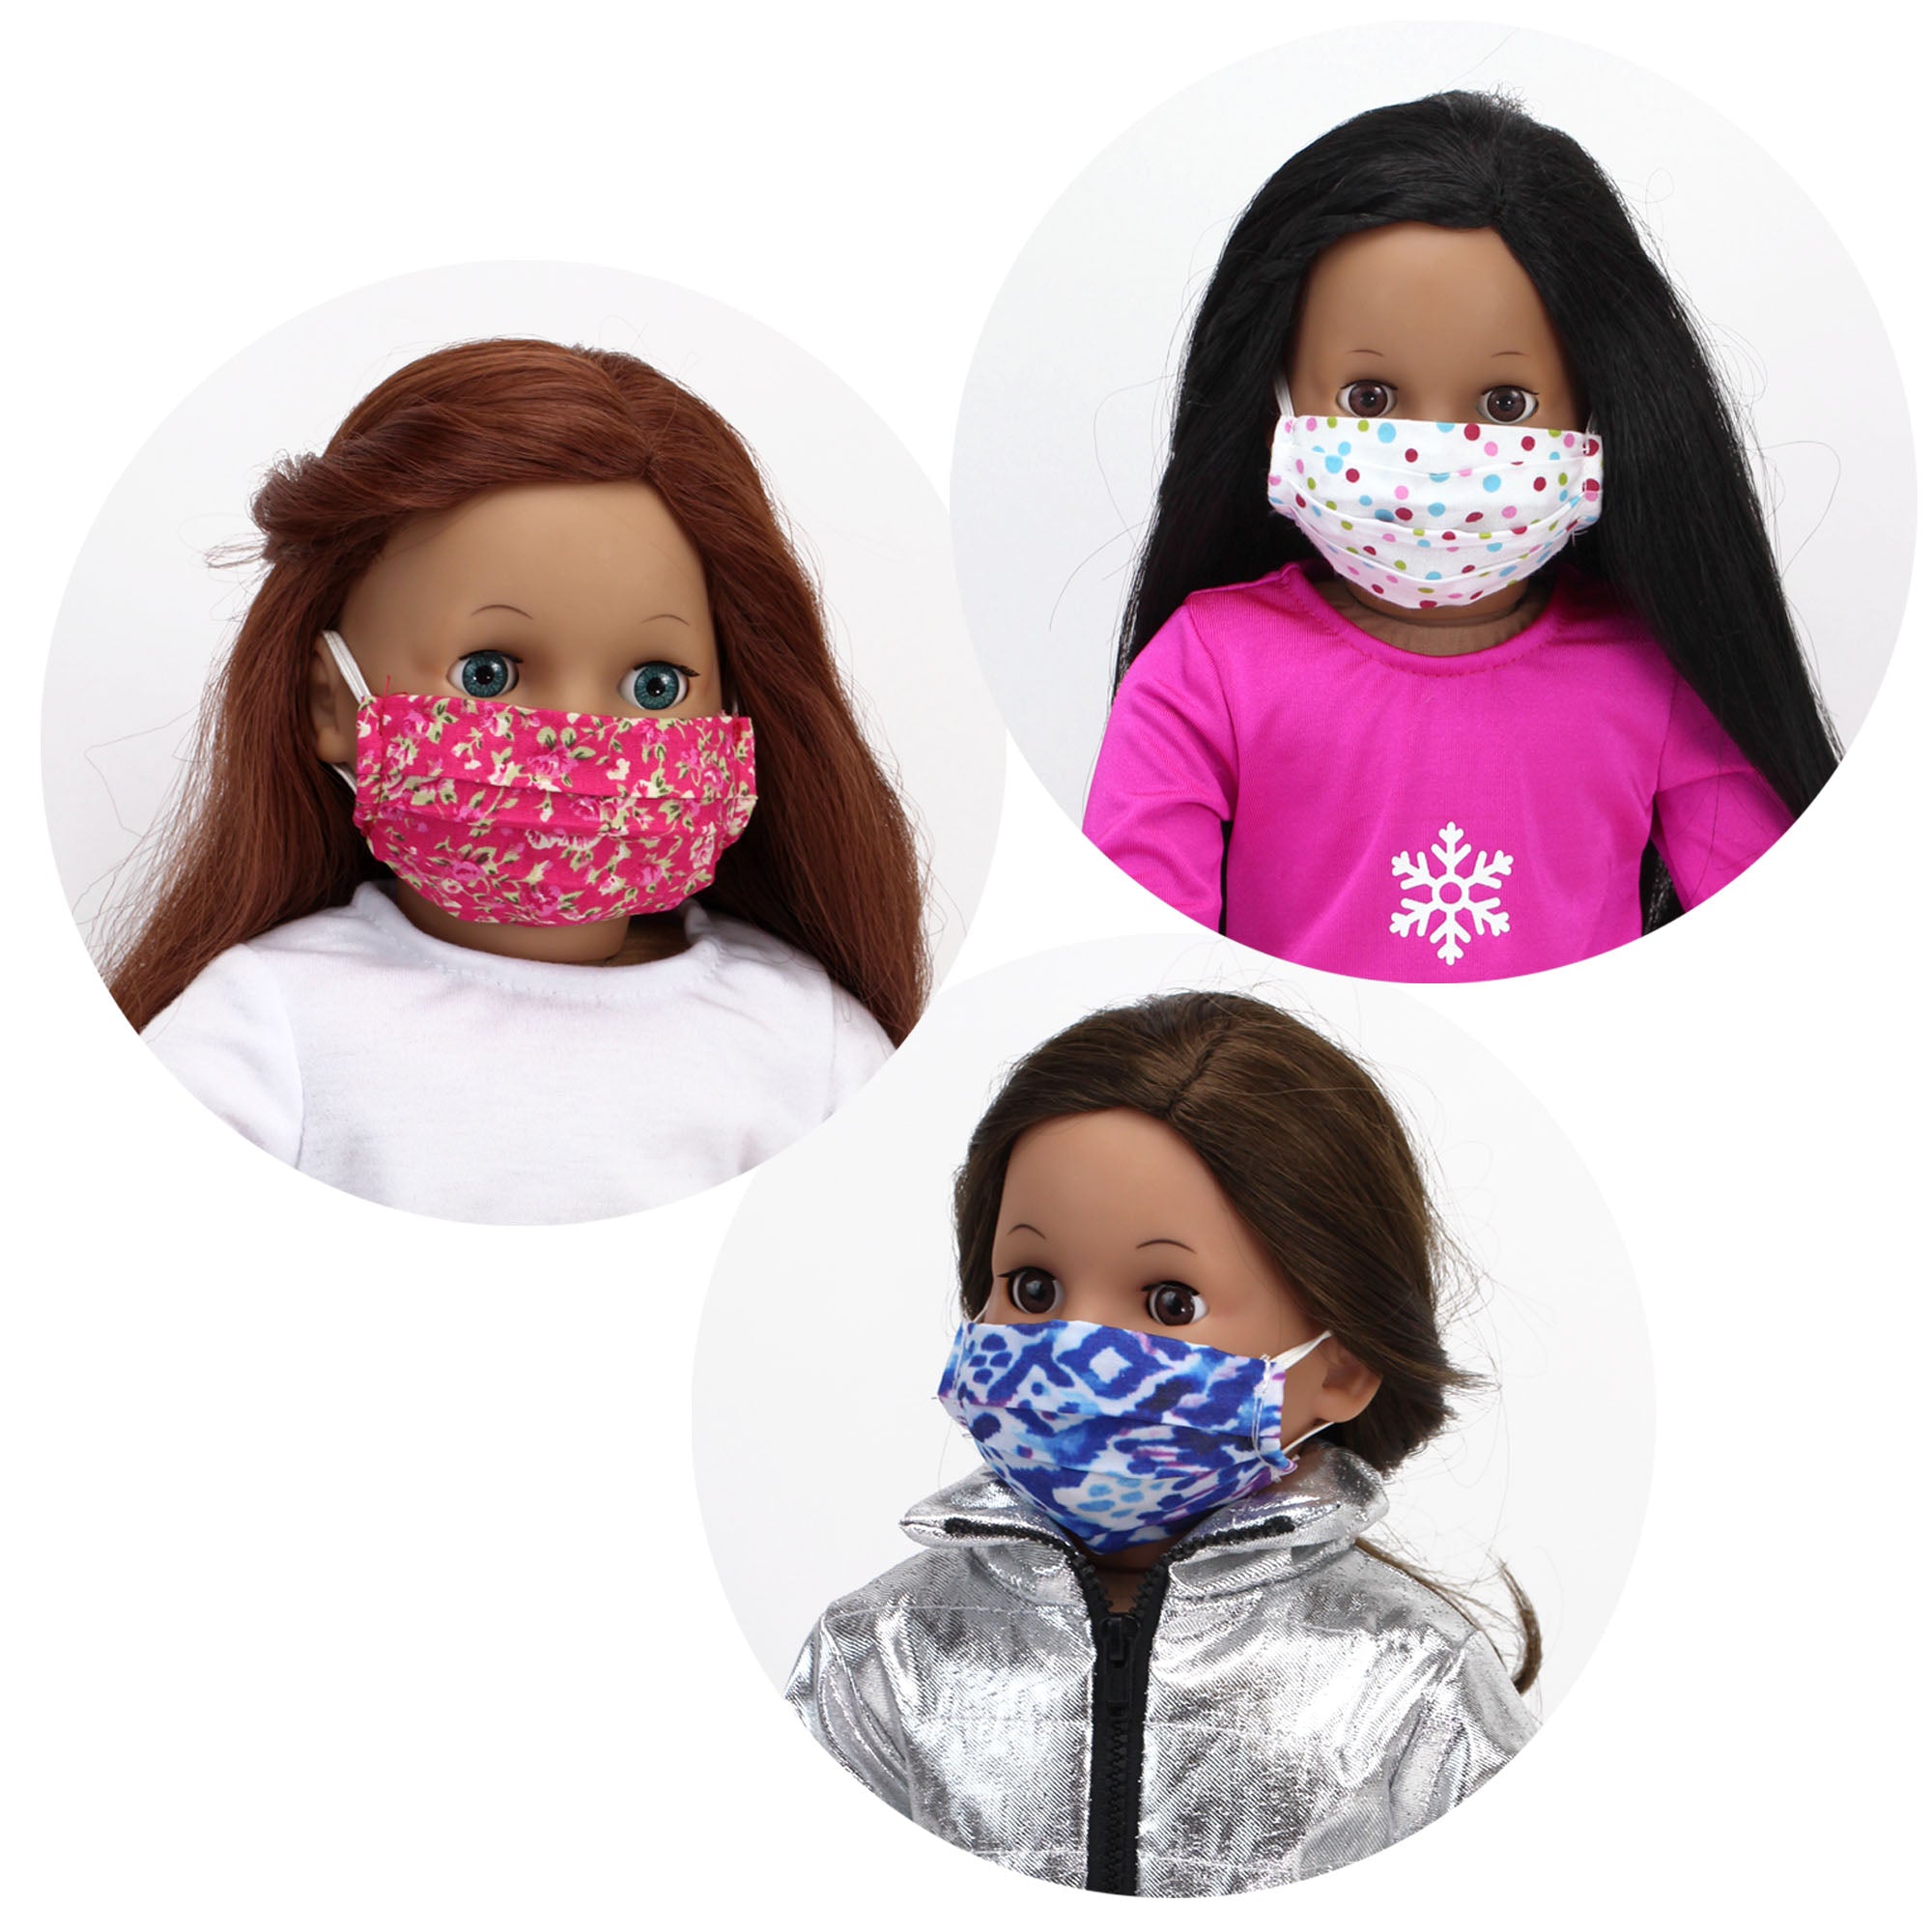 Sophia’s Set of 3 Mix & Match Printed Face Masks for 18” Dolls & Stuffed Animals, Multi